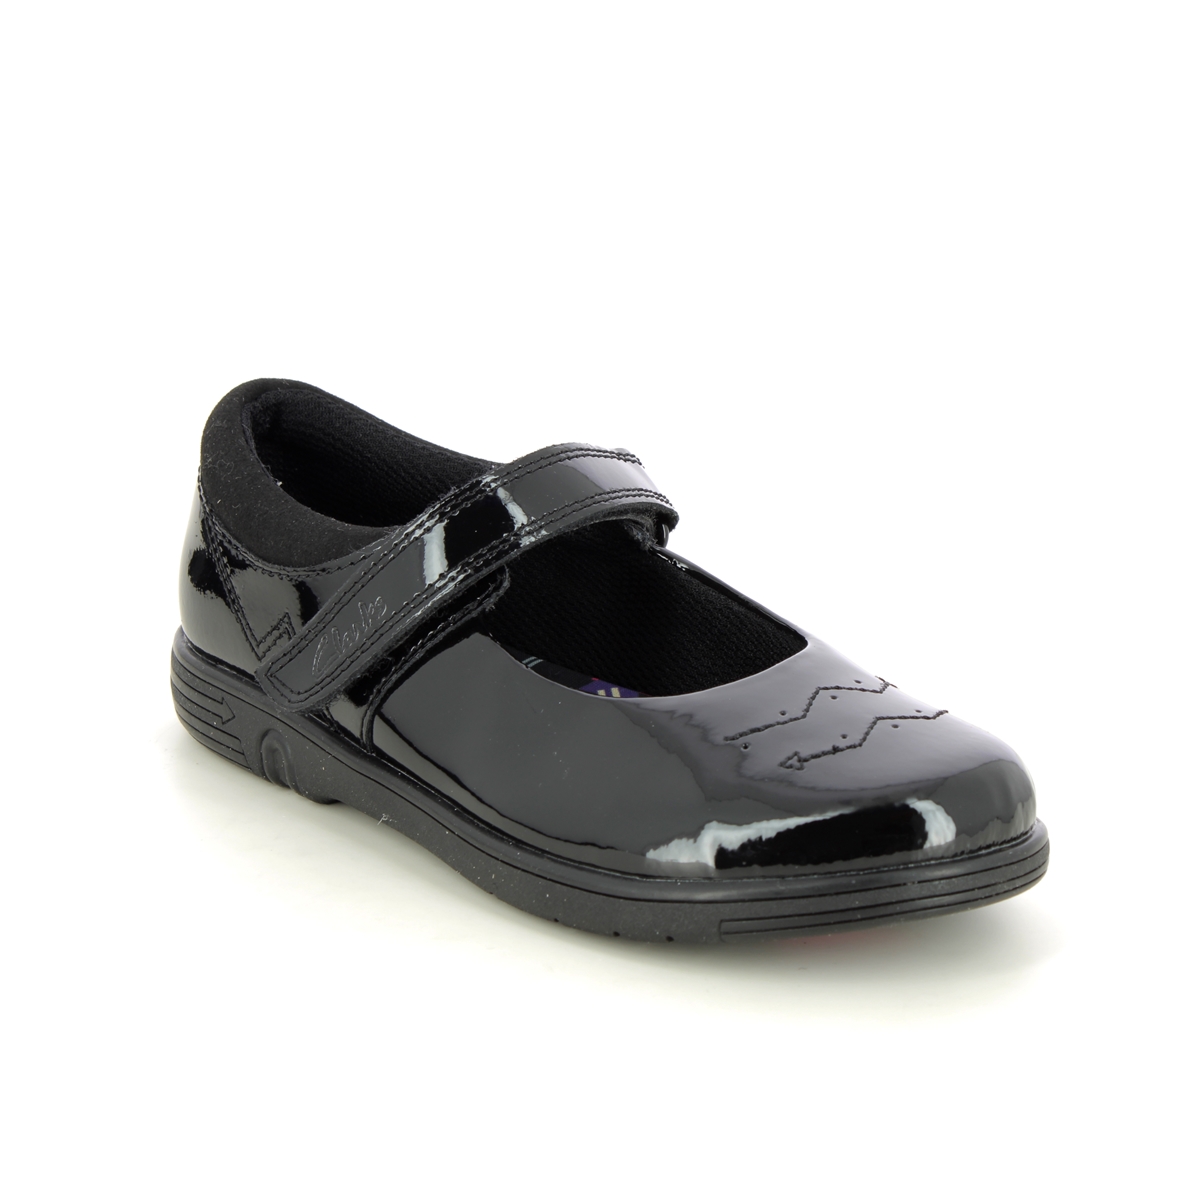 Clarks Jazzy Jig K Mary Jane Black Patent Kids Girls School Shoes 753086F In Size 11.5 In Plain Black Patent F Width Fitting Regular Fit For School Fo